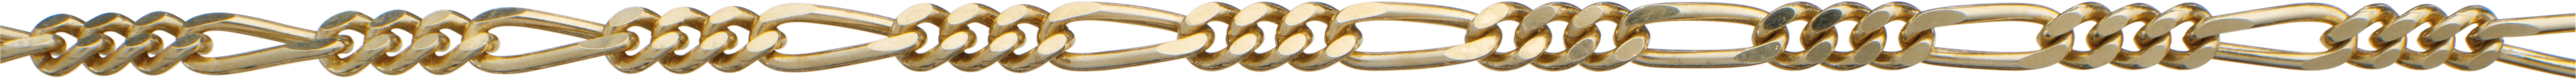 Figaro chain gold 333/-Gg 2.65mm, wire thickness 0.80mm